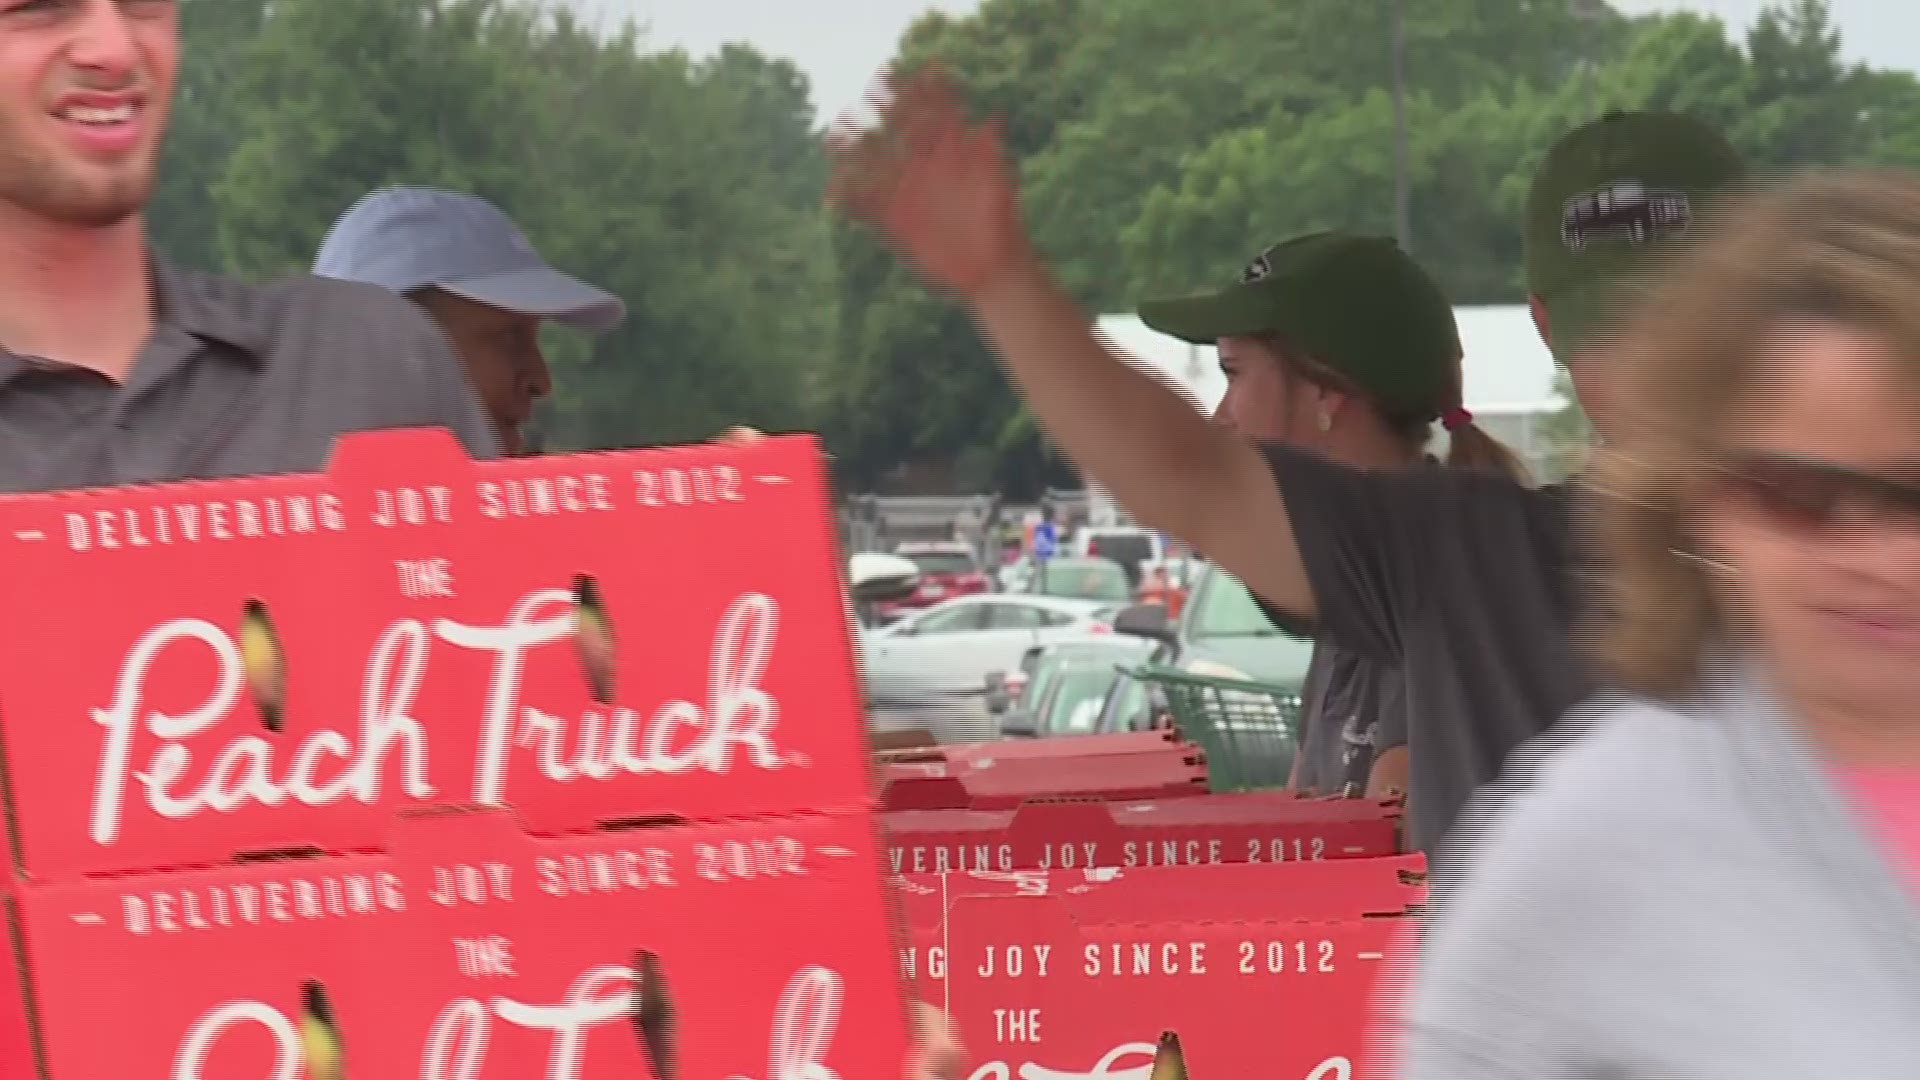 Infamous Peach Truck makes a stop in Northeast Ohio